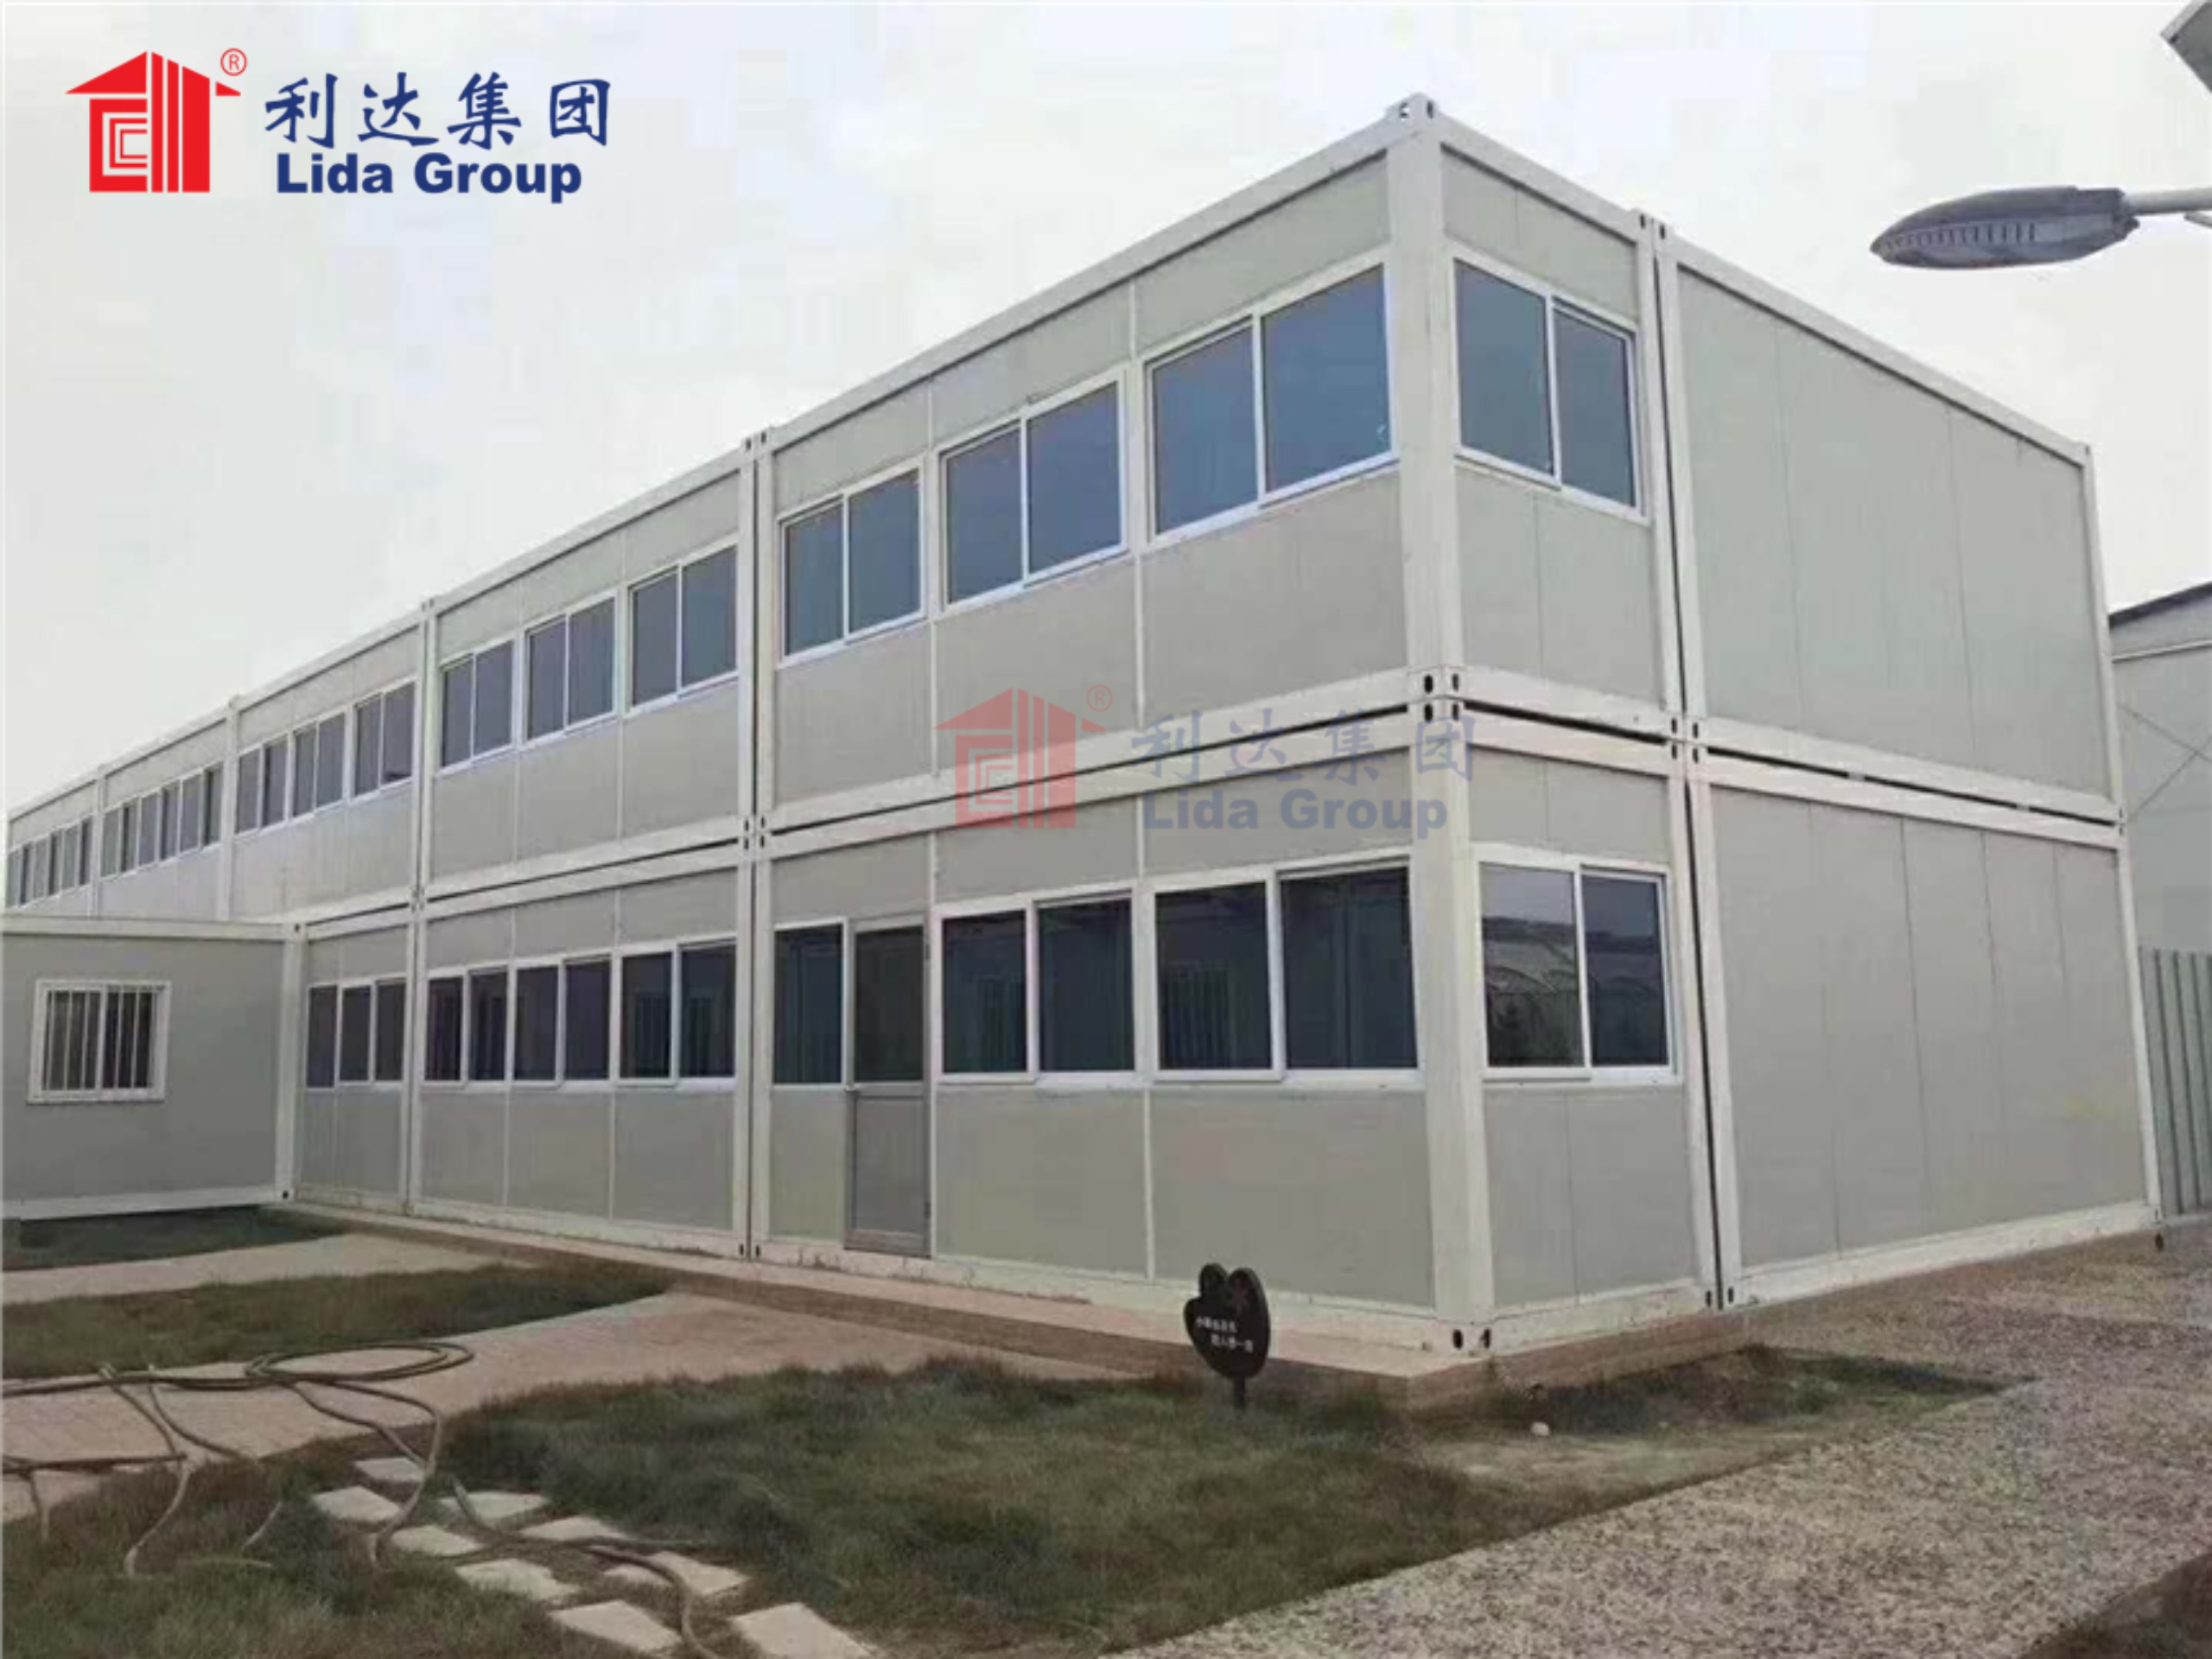 Lida Group lands Contract to Supply Hundreds of Temporary Prefabricated Container Homes for Wildfire Evacuees in Remote Region Lacking Shelter Infrastructure